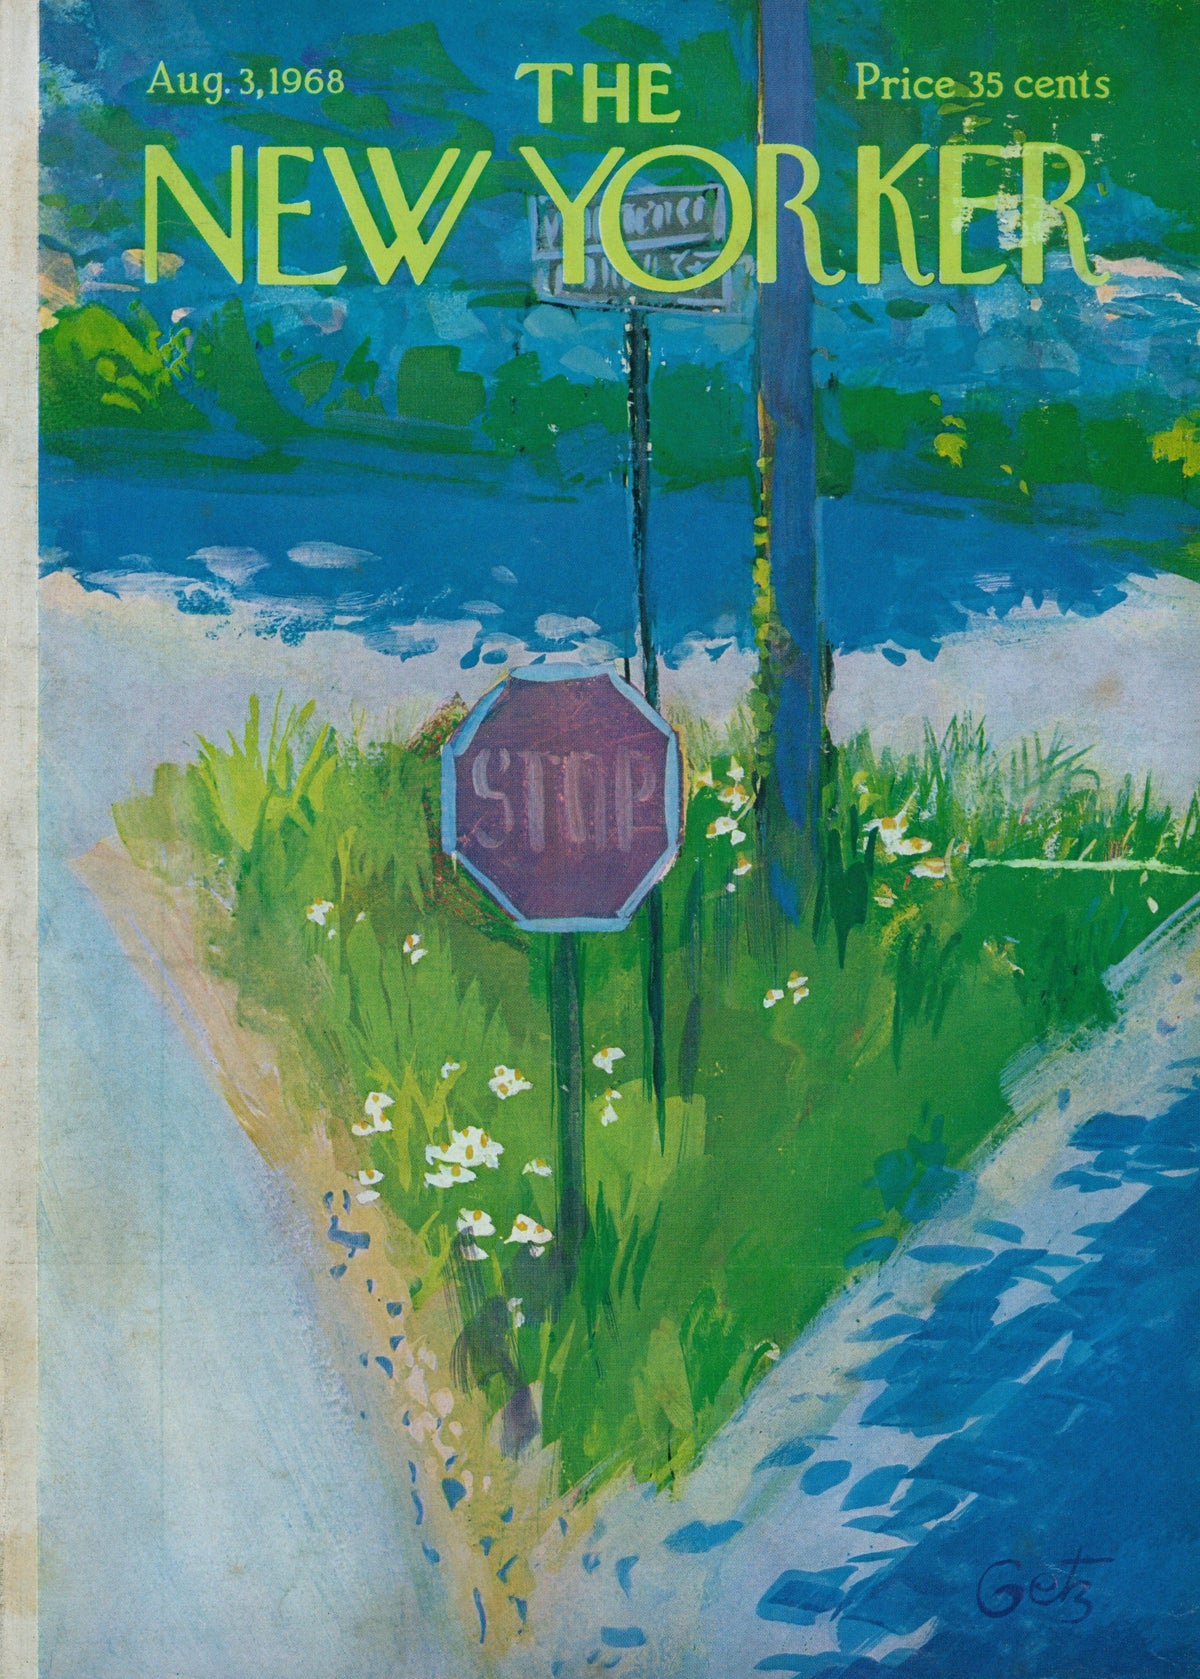 August Stroll- The New Yorker - Authentic Vintage Antique Print